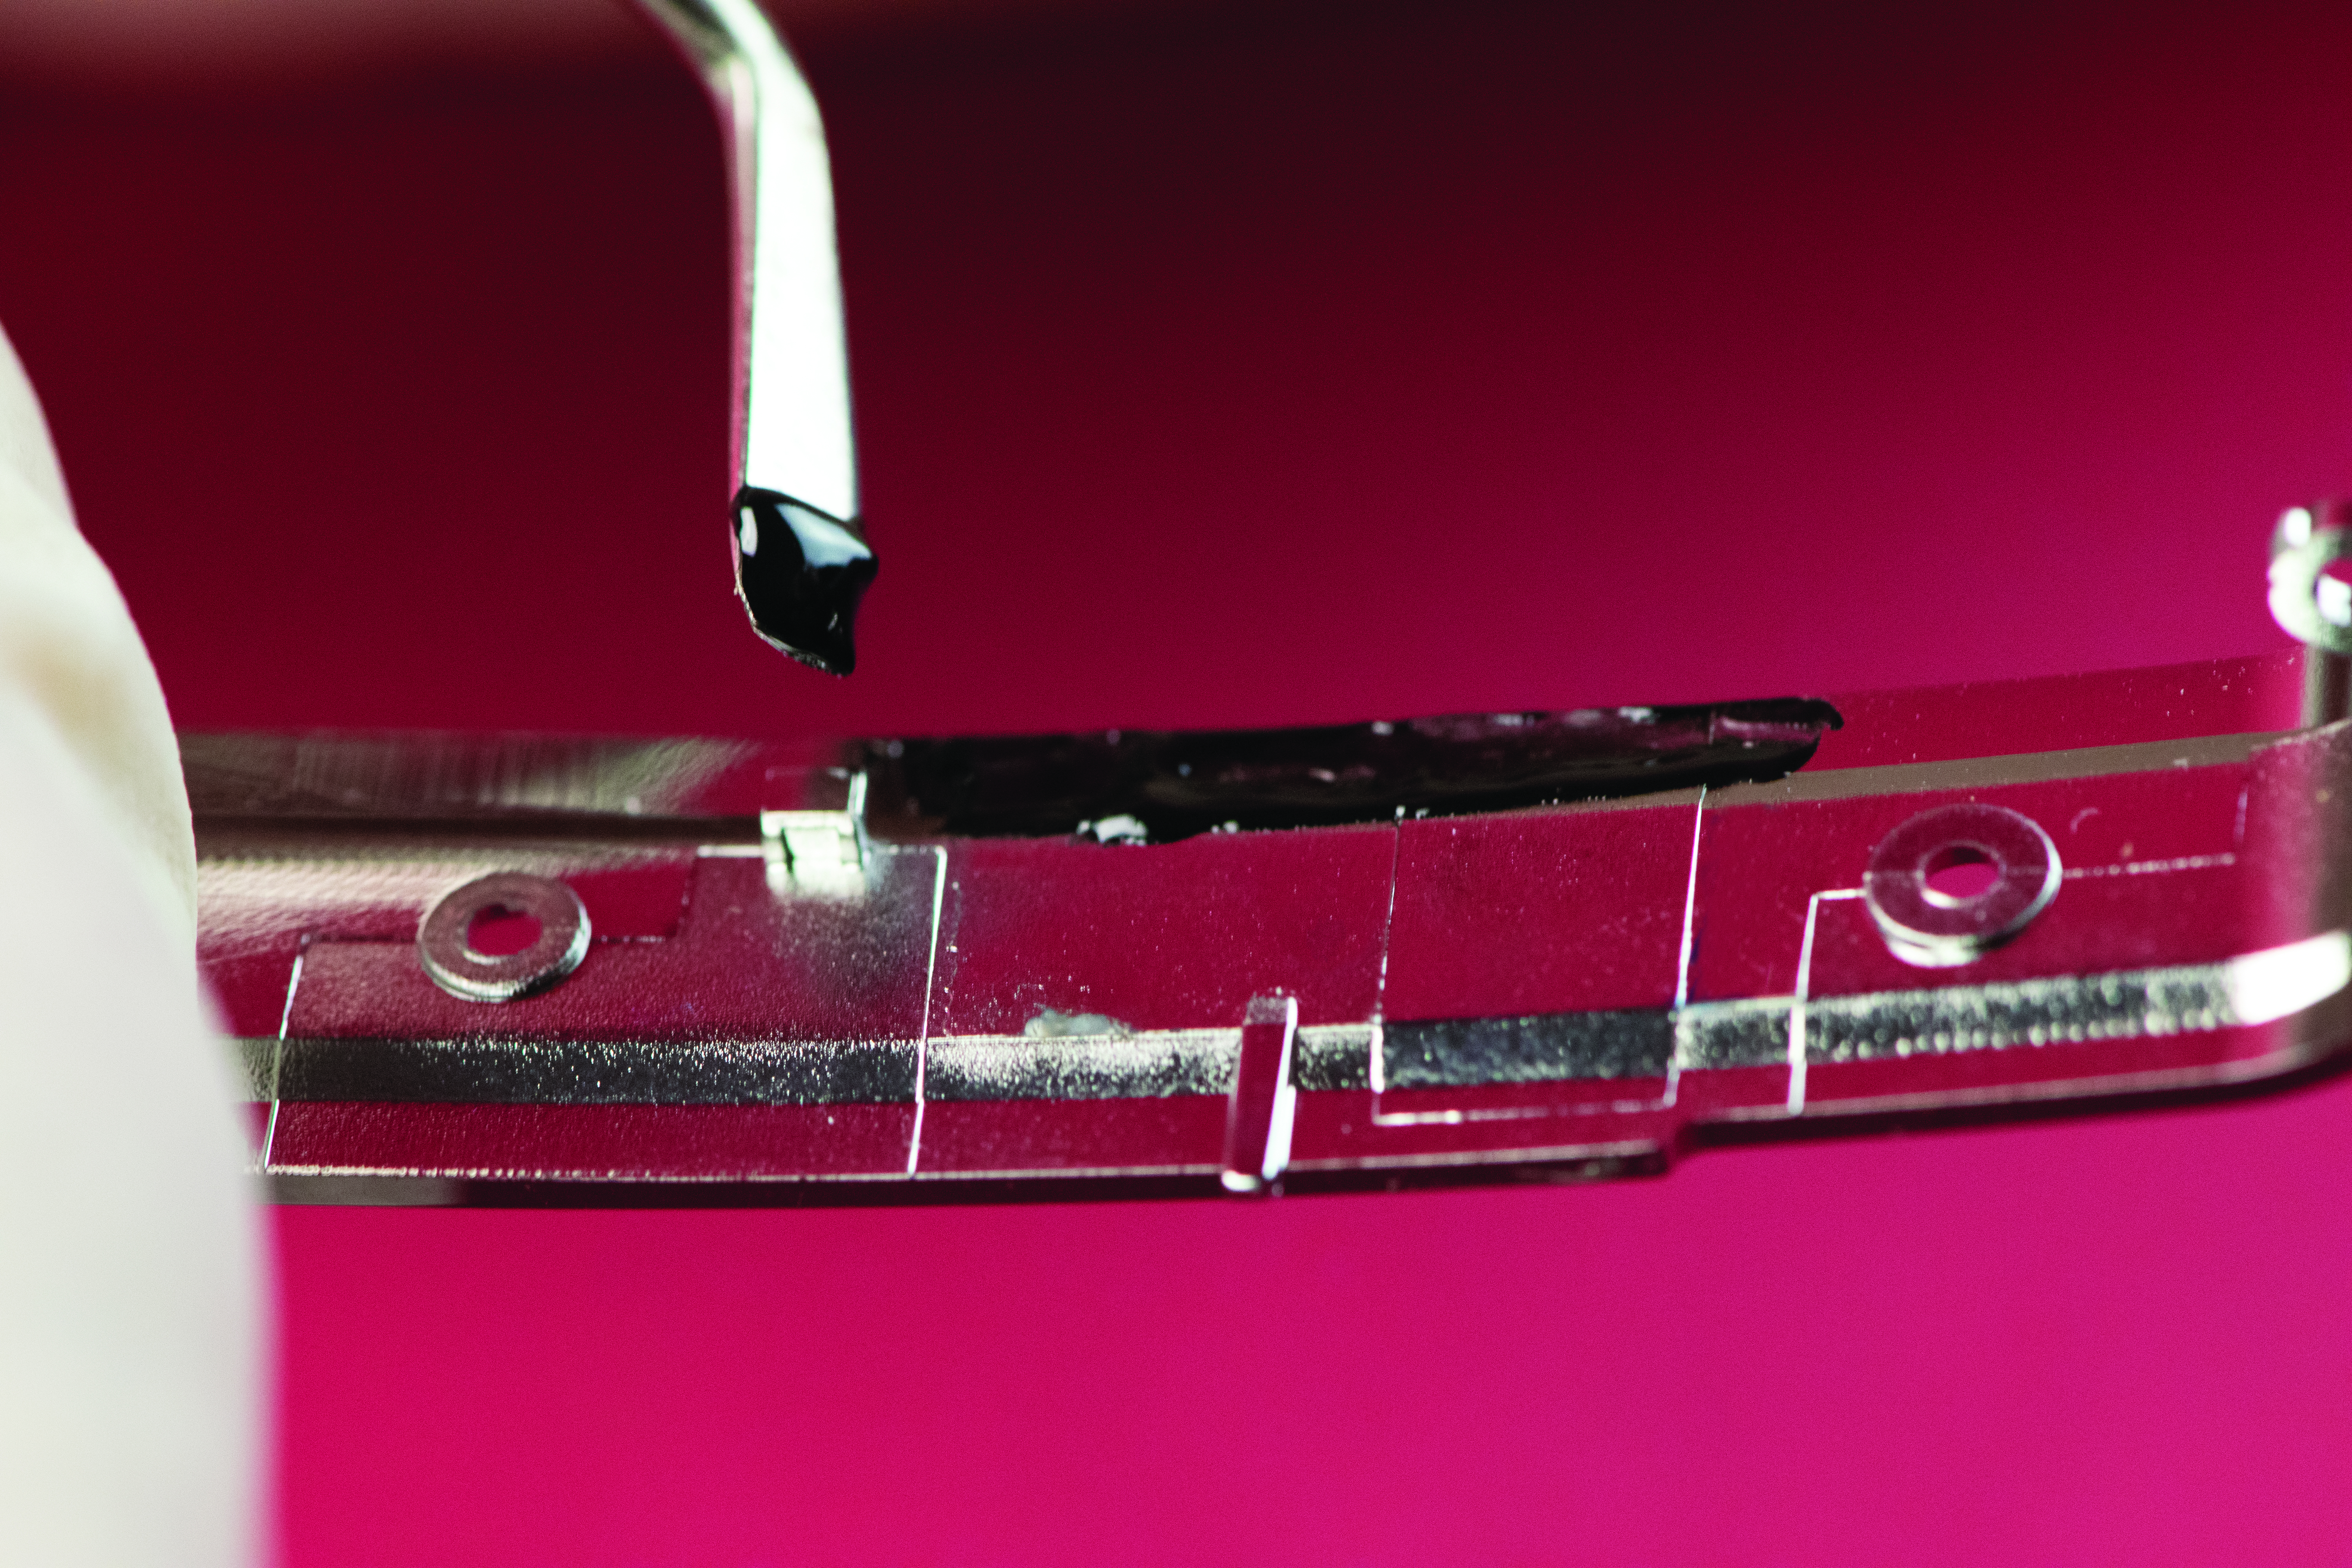 Medical Grade Epoxy Offers Thermal Conductivity and Electrical Insulation